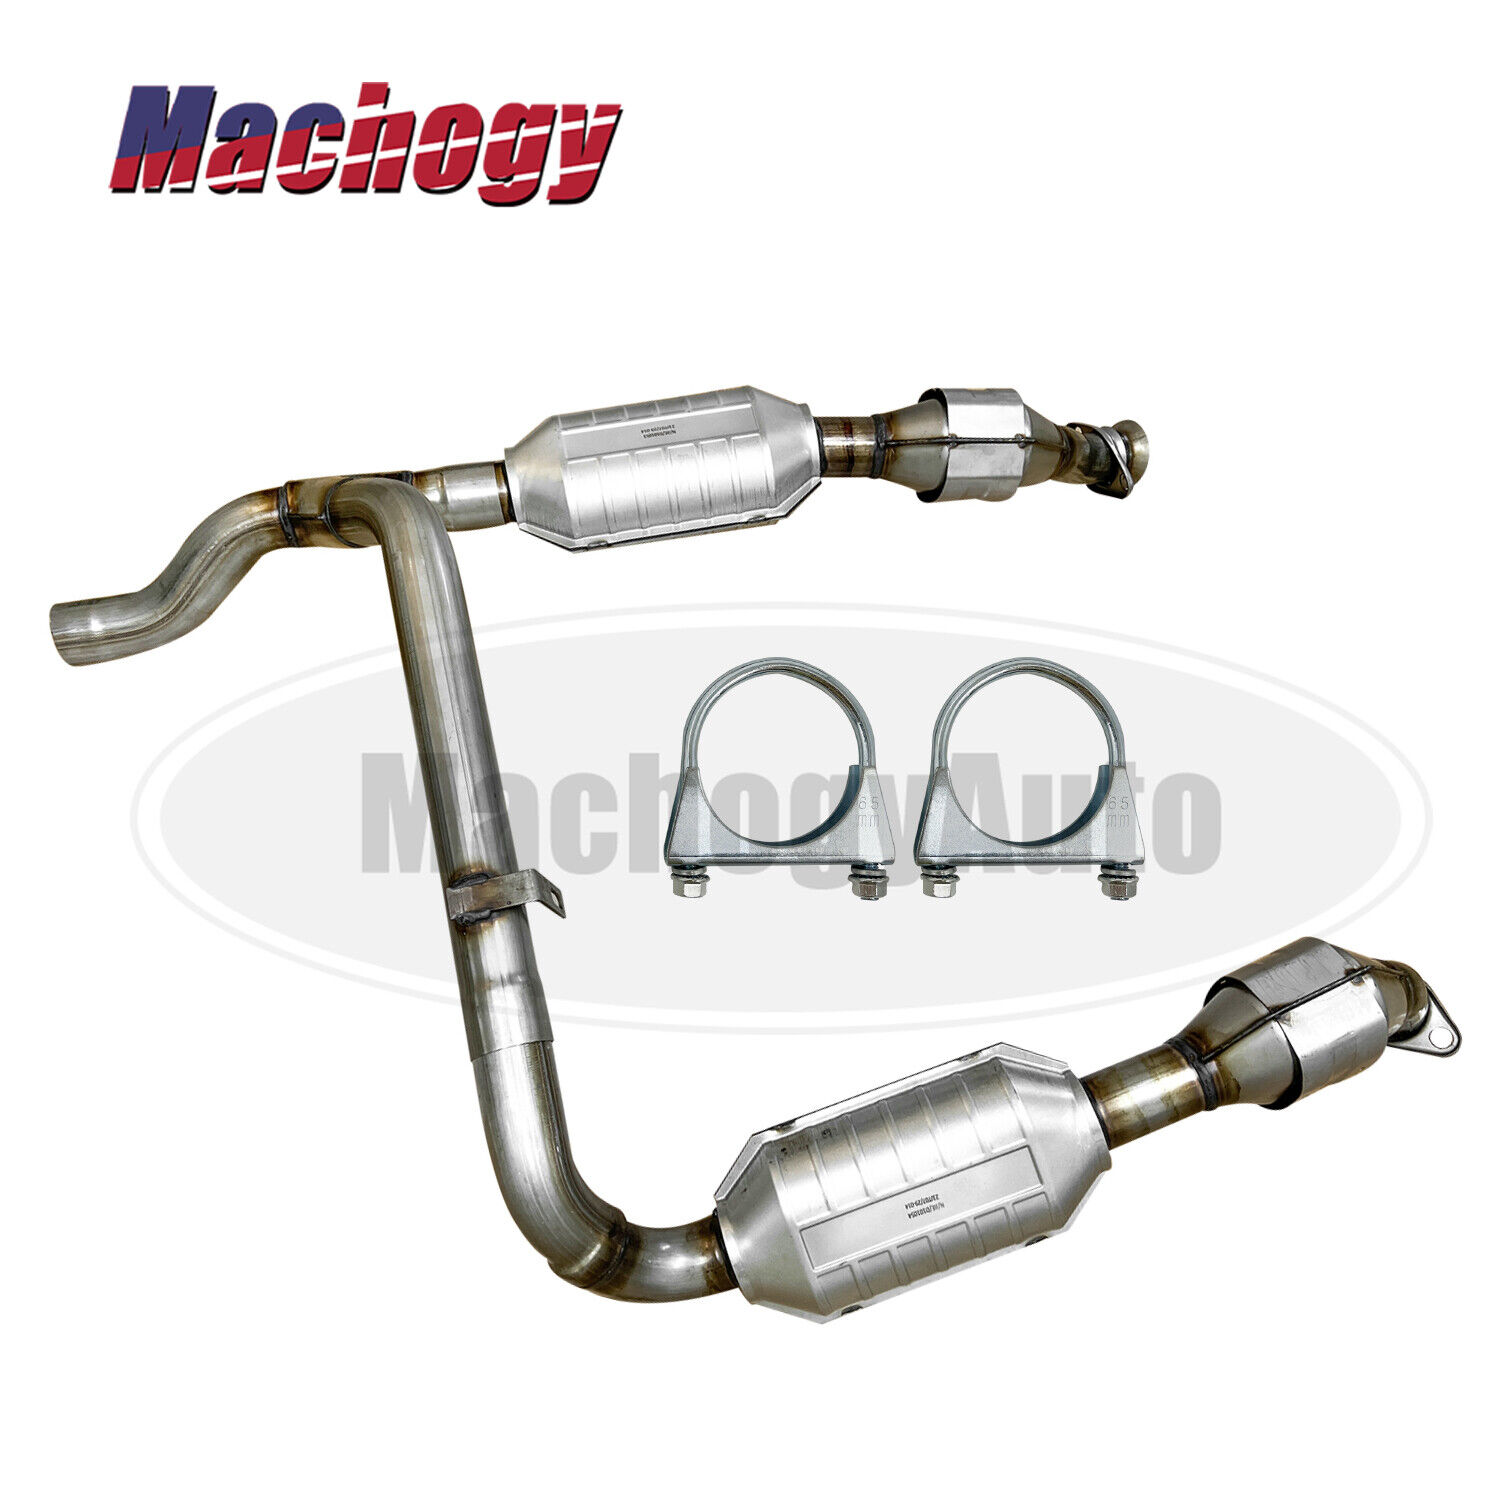 3x Catalytic Converters for 2001 2002 2003 Ford F-150 4.6L V8 (4WD VEHICLE ONLY)